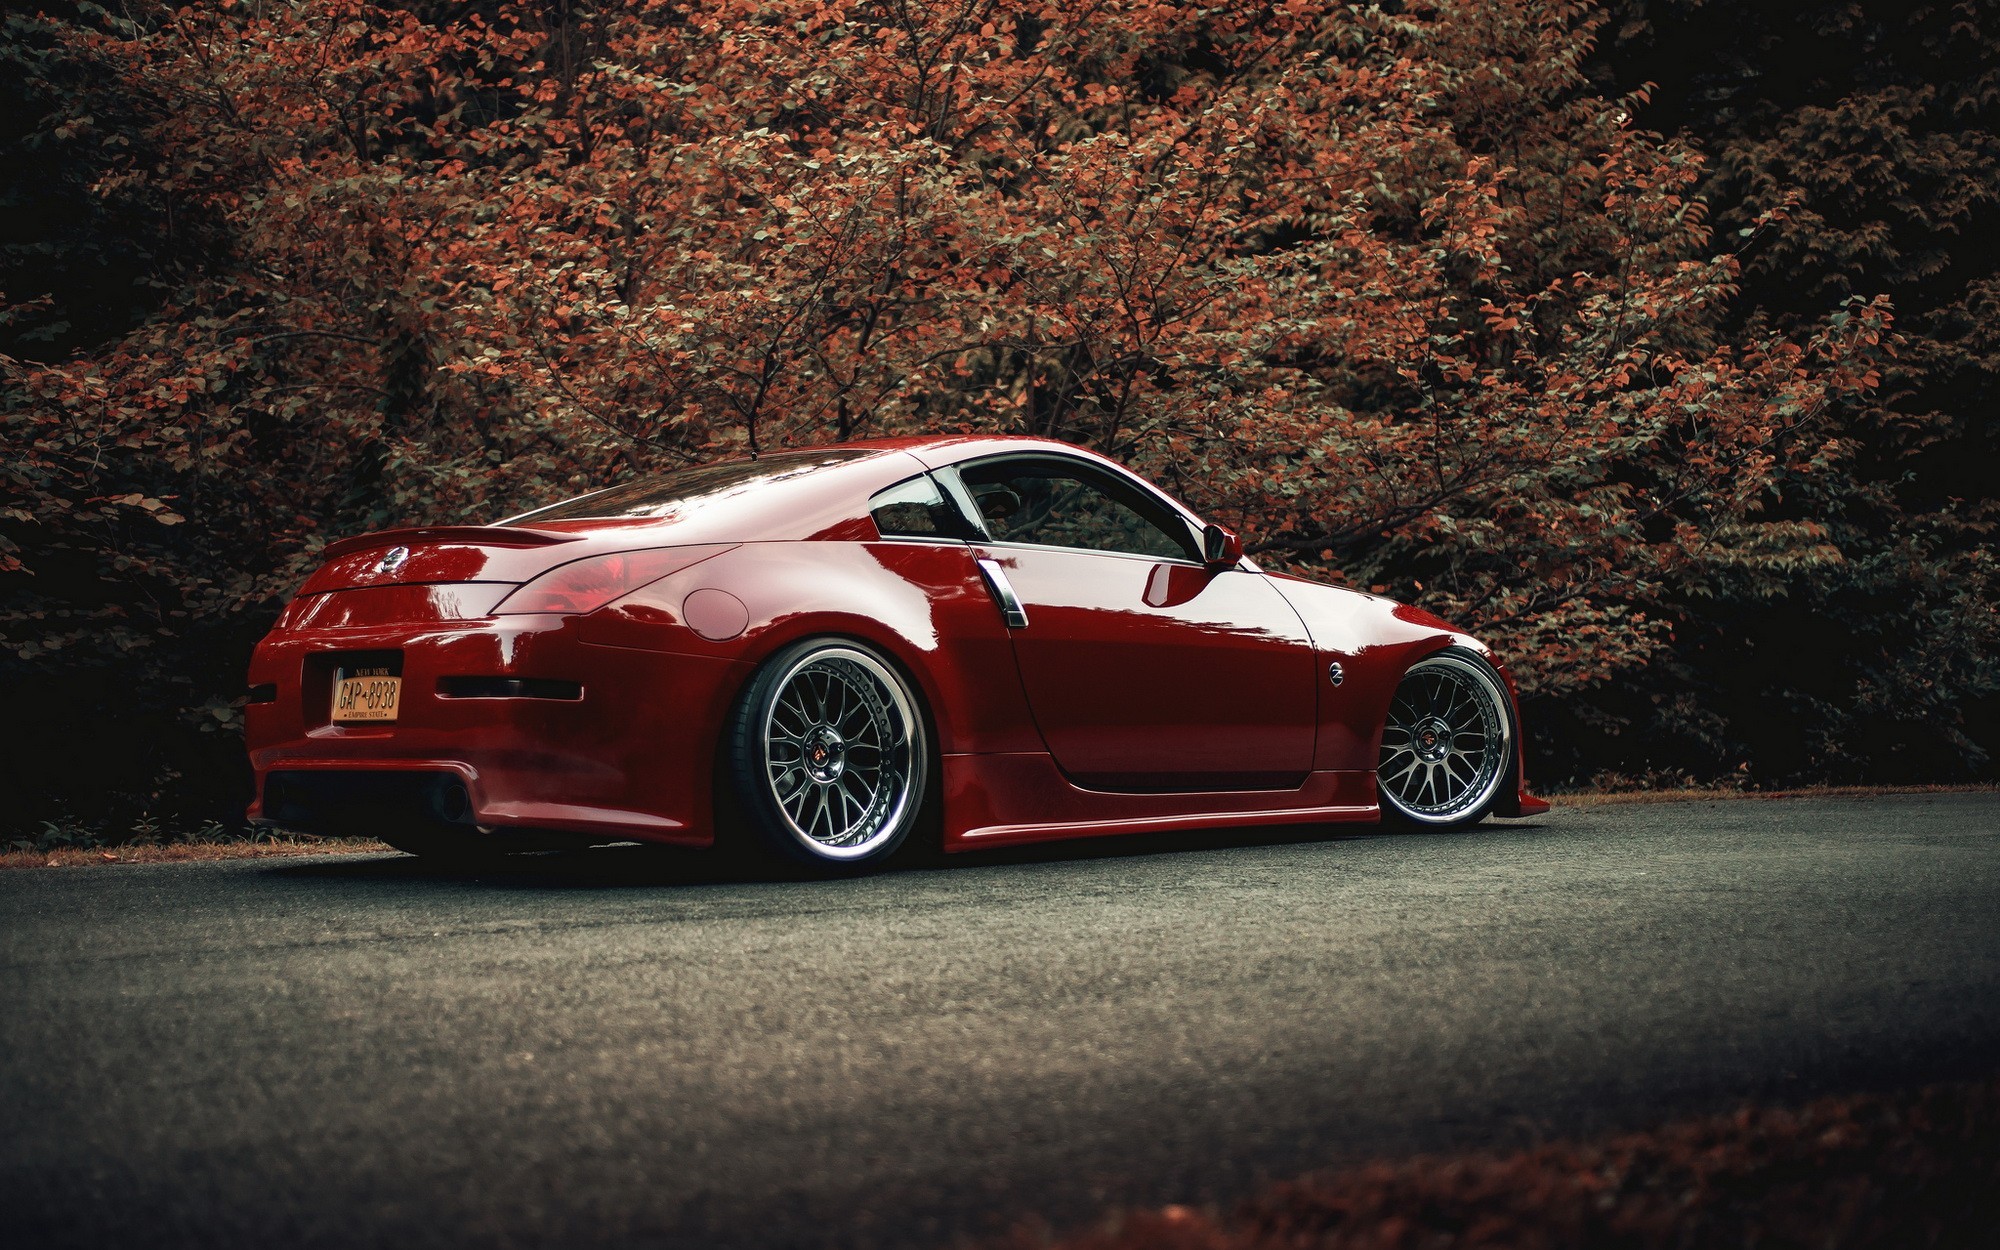 Nissan 350z cars red tuning wallpaper 7162 PC 2000x1250